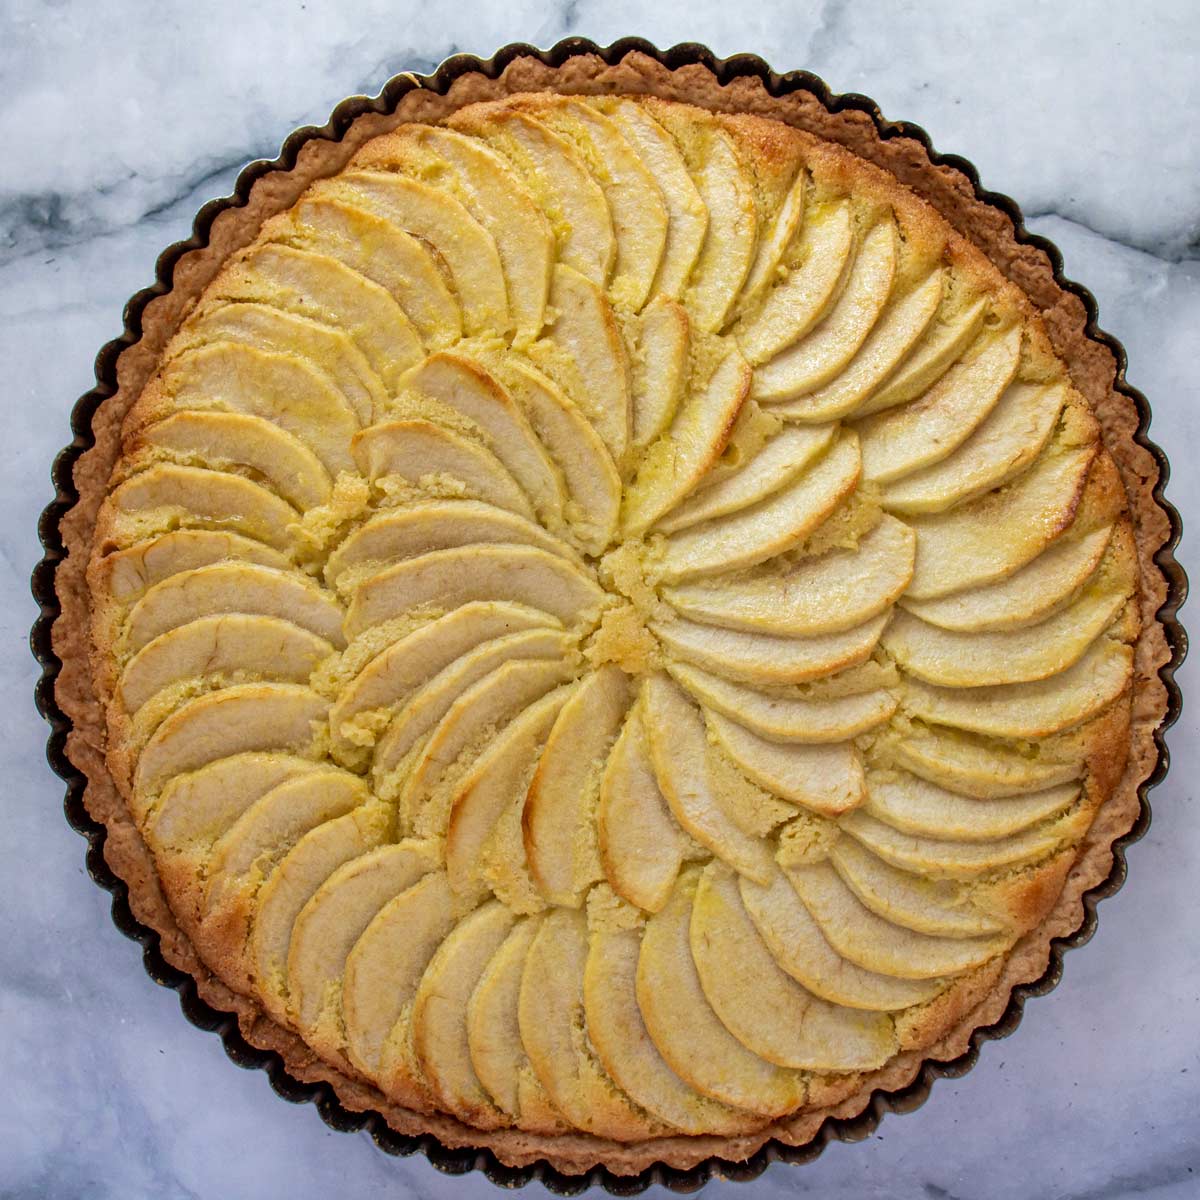 A baked tarte aux pommes (French apple tart) on a marble background.